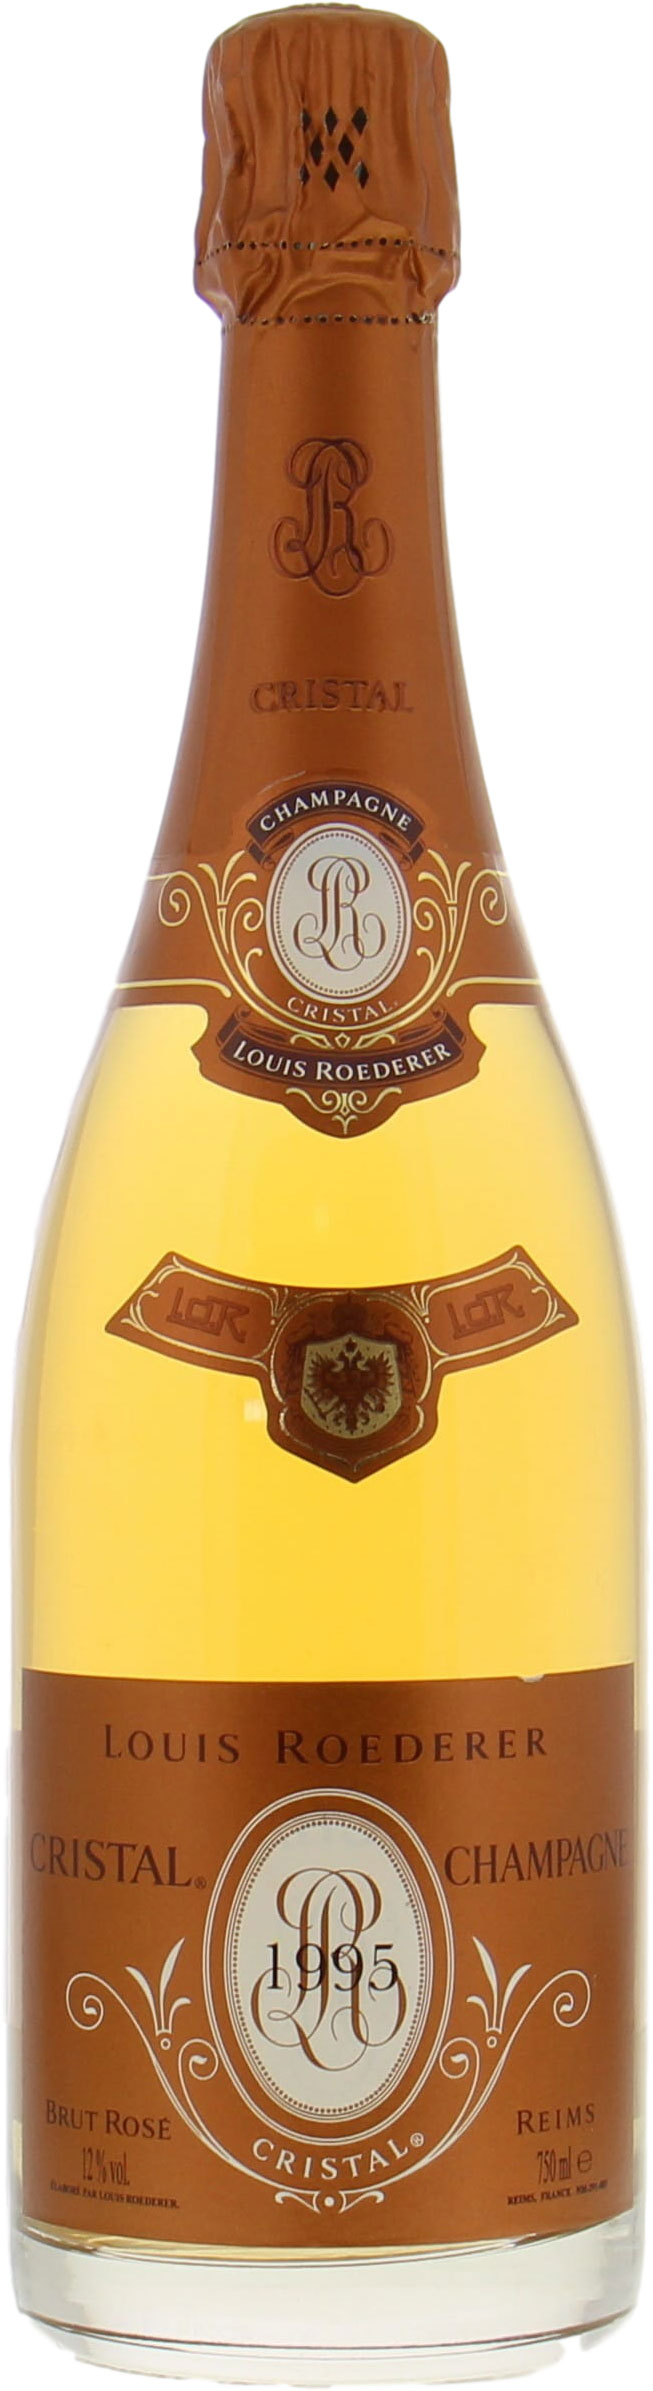 Louis Roederer - Cristal Rose 1995 Perfect